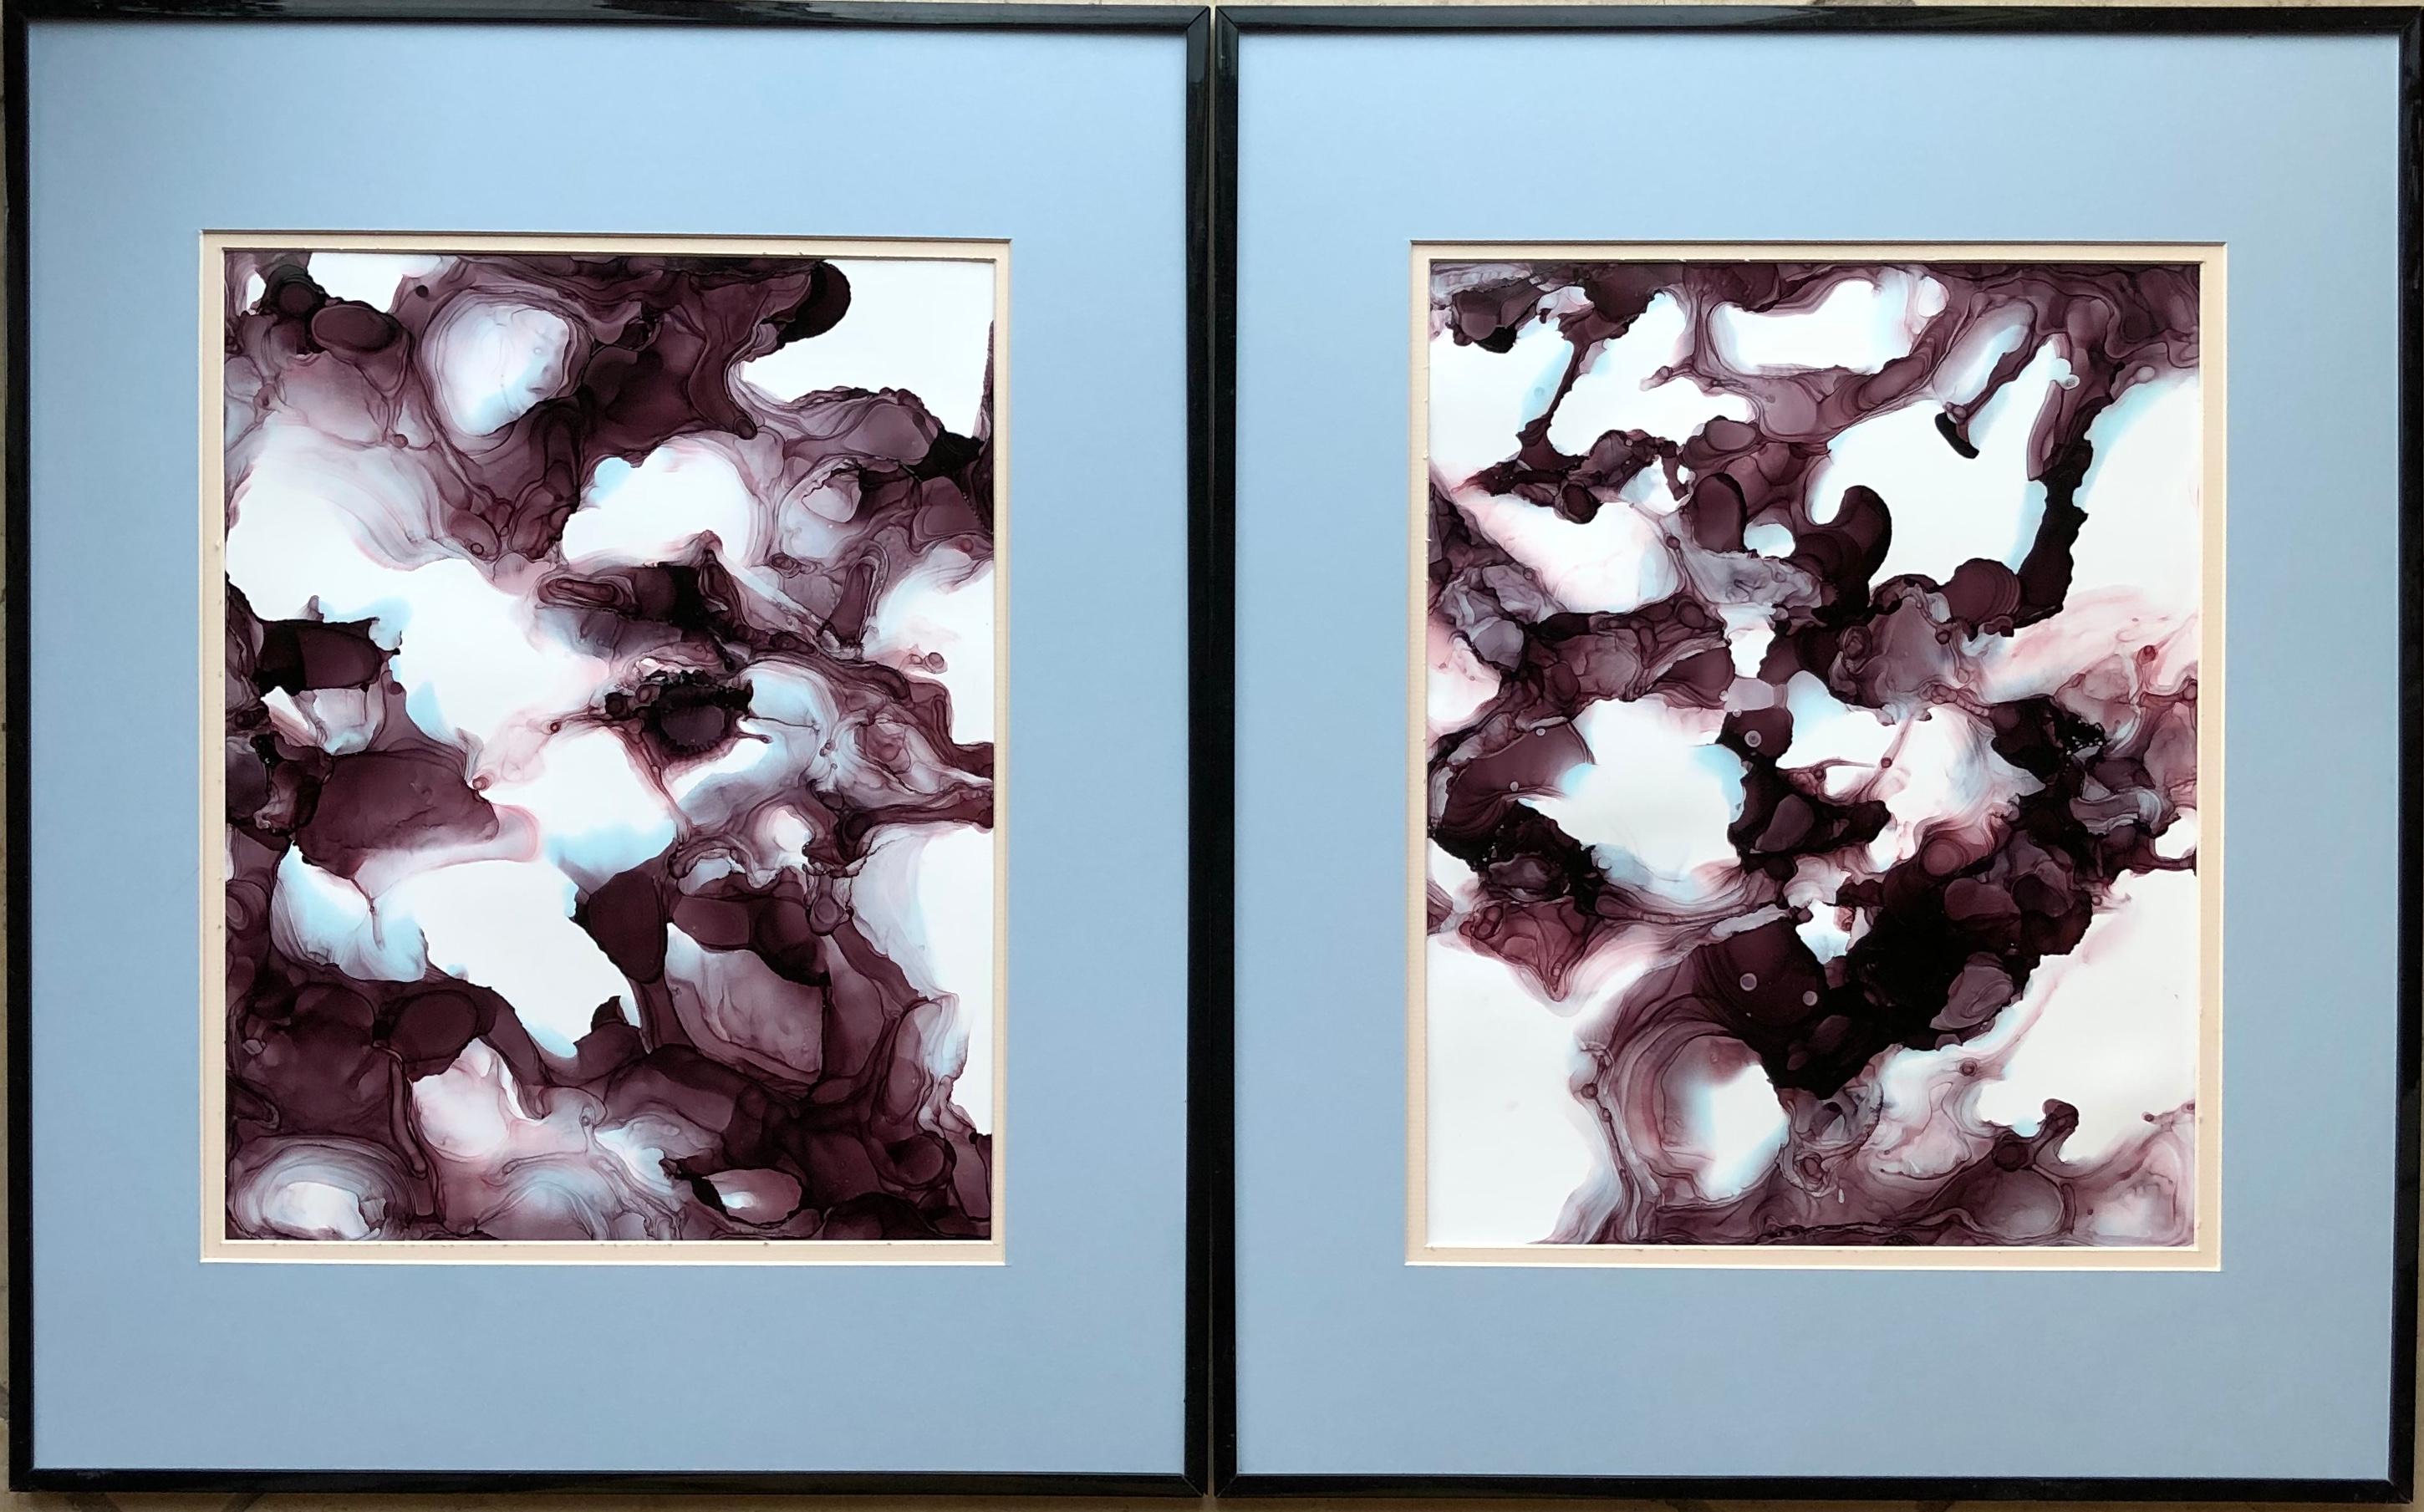 The mazes of memory-abstraction art, made in brown, light blue, aubergine color